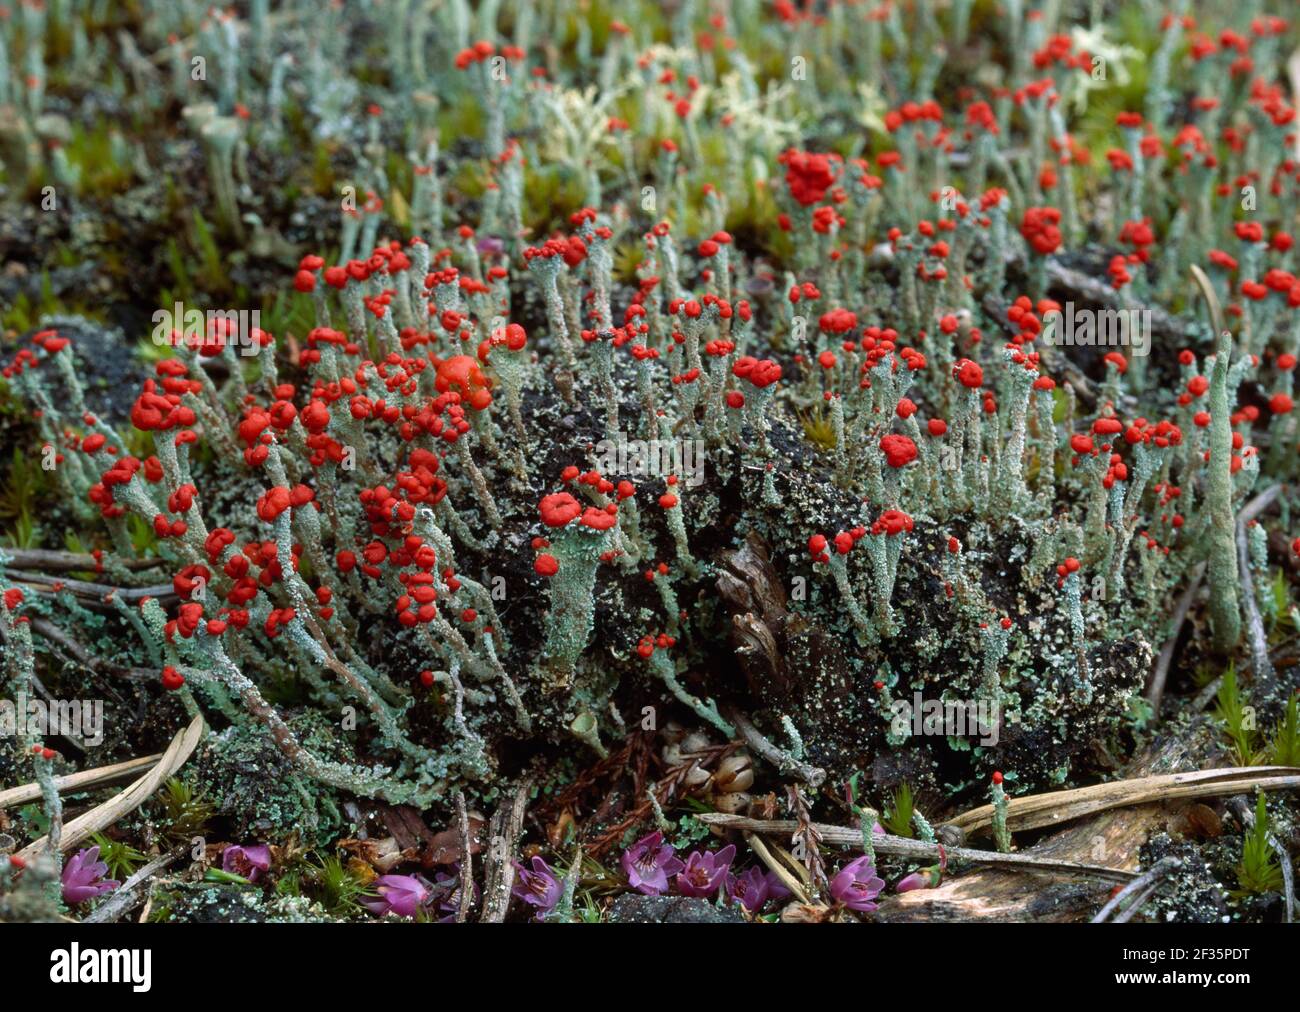 PIXIE-CUP LICHEN   August  Cladonia coccifera  County Armagh, Ulster. Bright red caps  are apothecia which produce spores., Credit:Robert Thompson / A Stock Photo